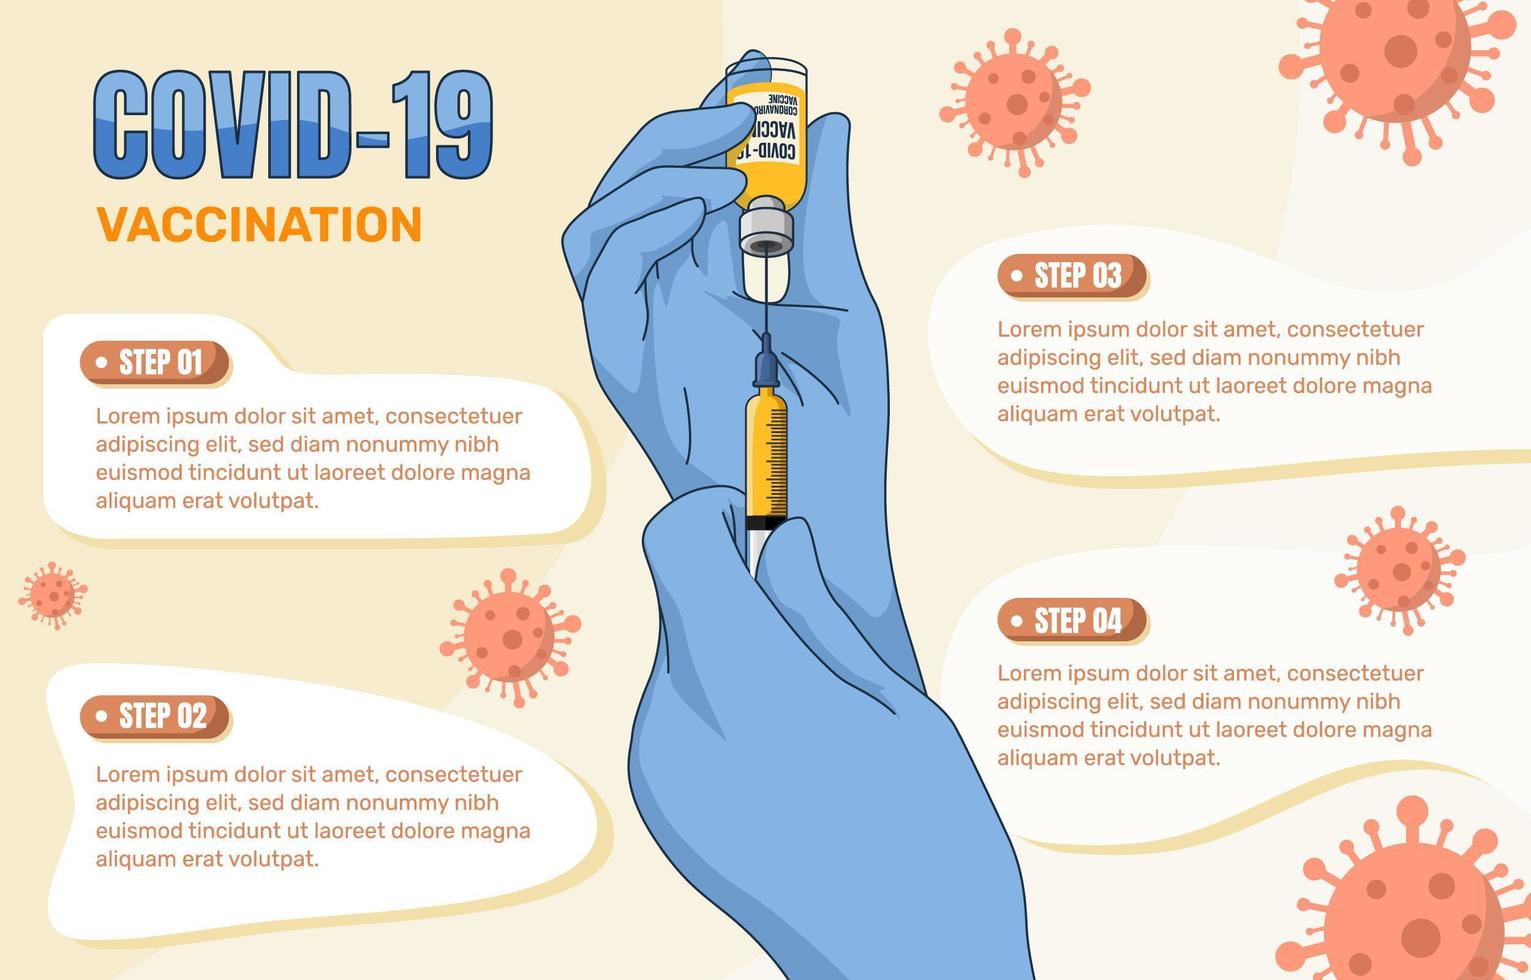 Covid 19 Vaccination Infographic vector